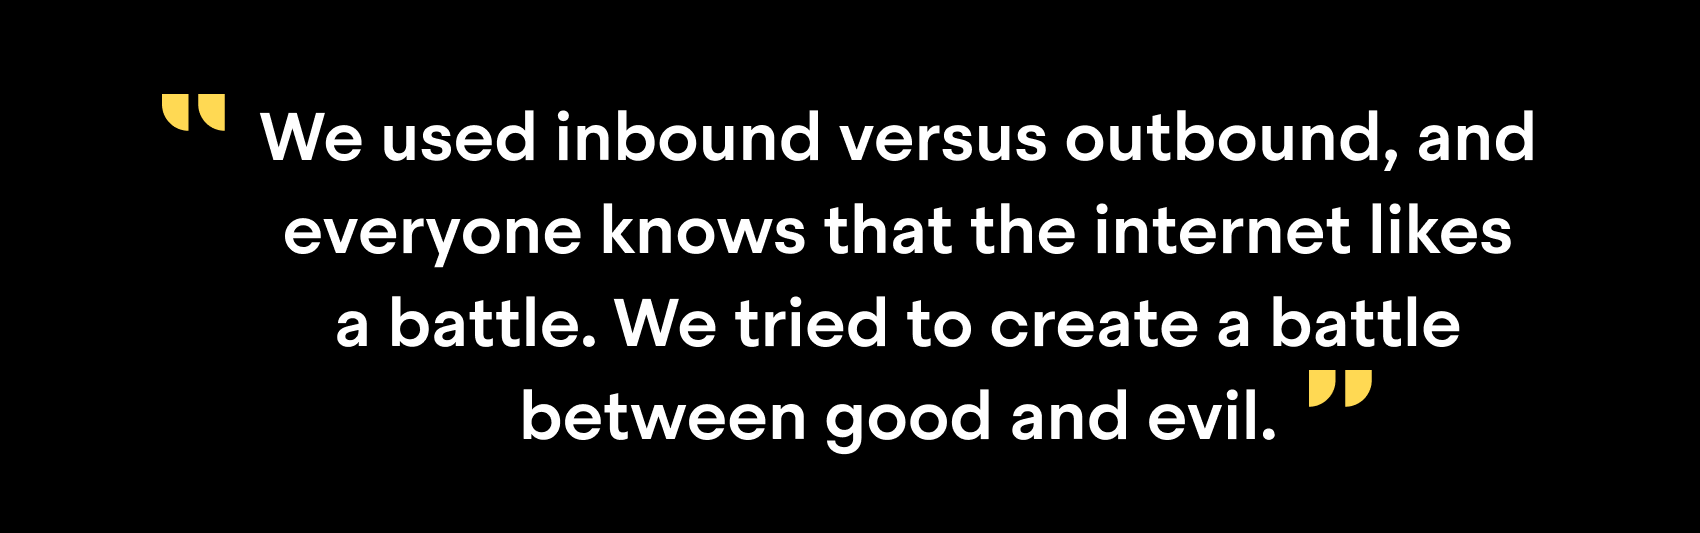 "We used inbound versus outbound, and everyone knows that the internet likes a battle. We tried to create a battle between good and evil."